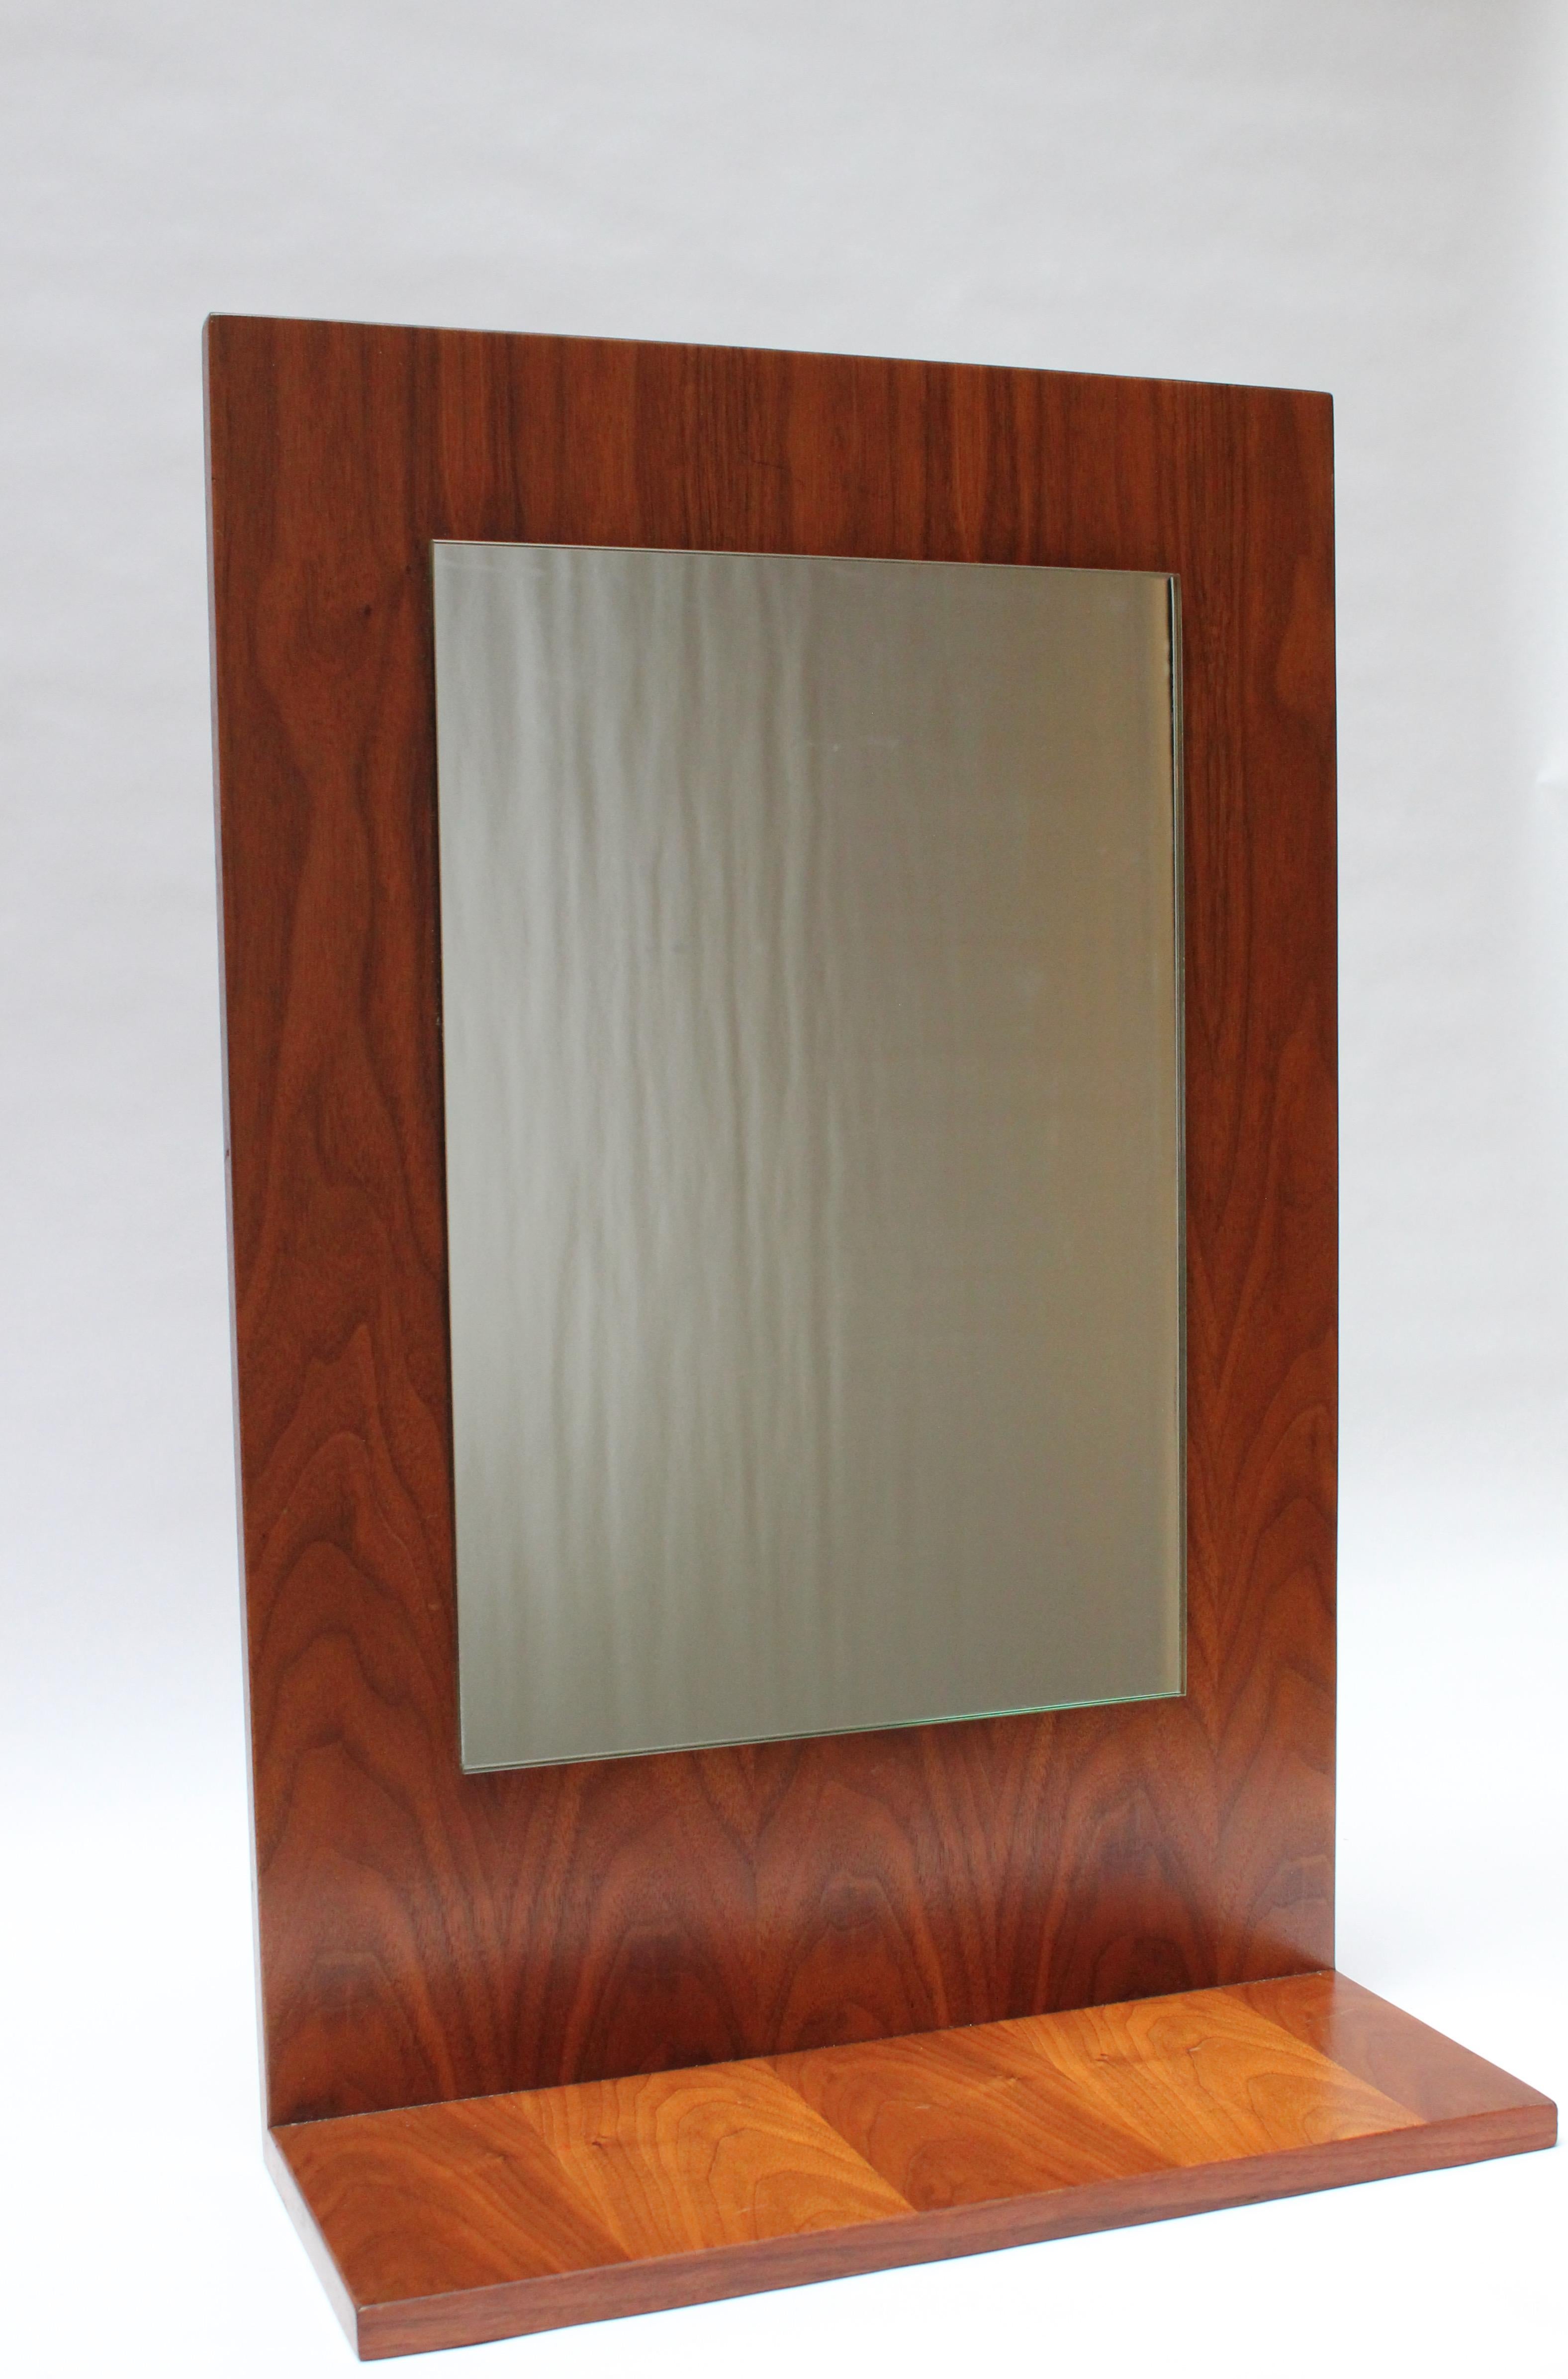 This American Modern walnut mirror can rest on a surface (supported by its shelf) or be mounted to a wall (the wire has been added, so the mirror is in ready to hang condition). The back is unfinished, and the piece is in good, vintage condition